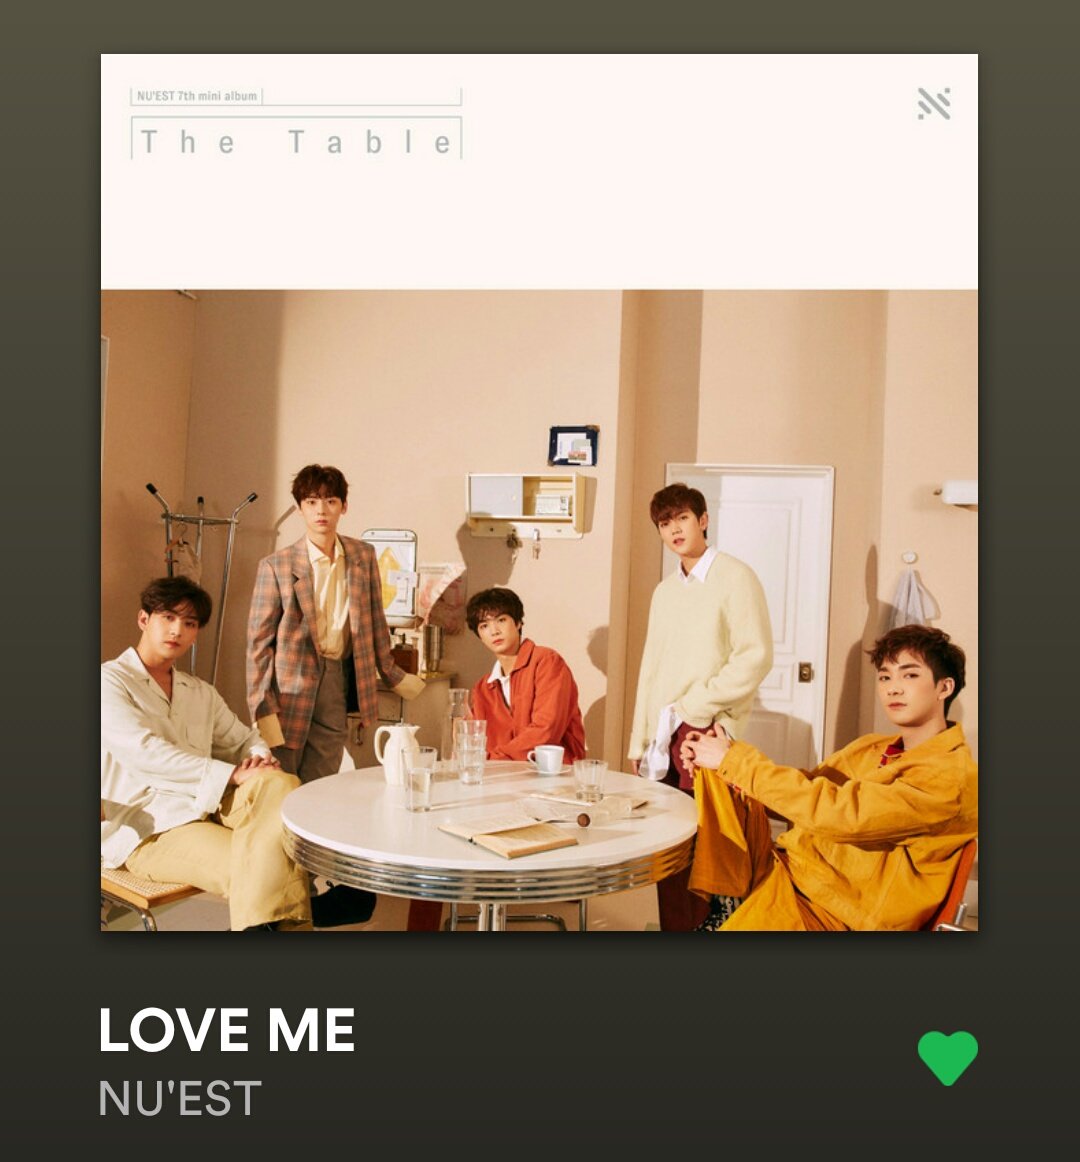 if your favorite song is love me: you are a part of the mainstream and lowkey lame